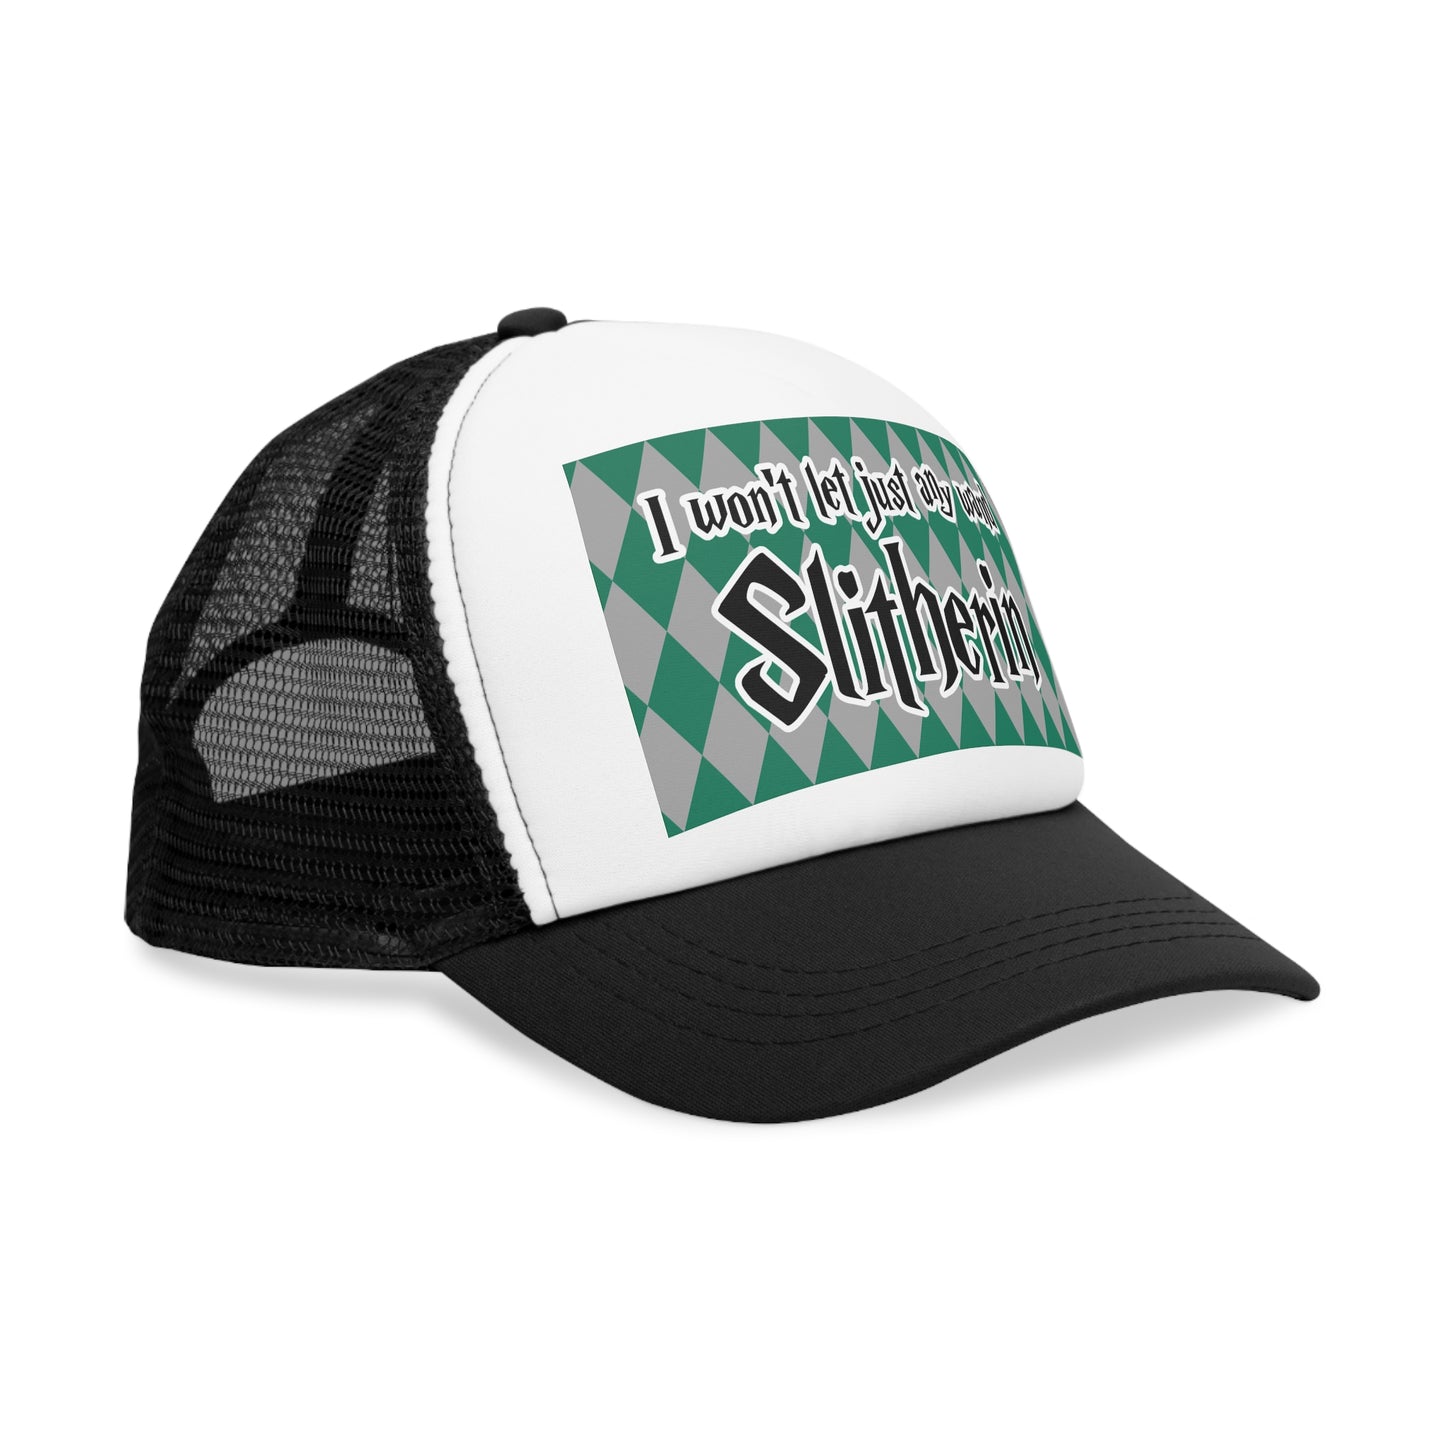 Dirty Potter Cunning printed trucker hat